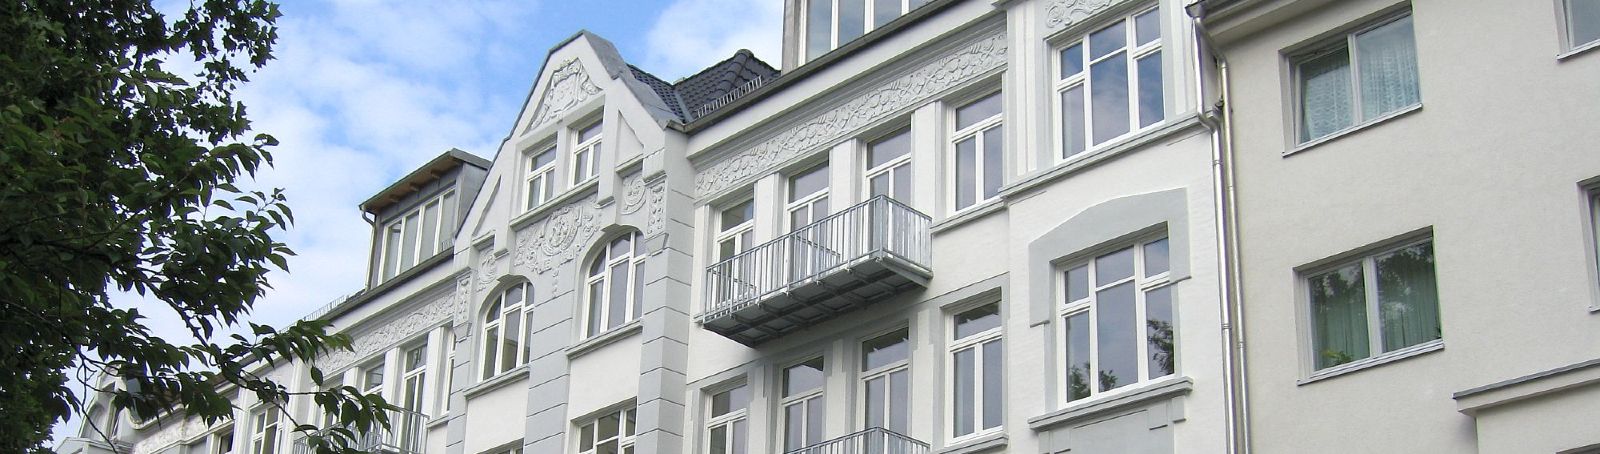 View of the facade after the renovation of both halves of the house